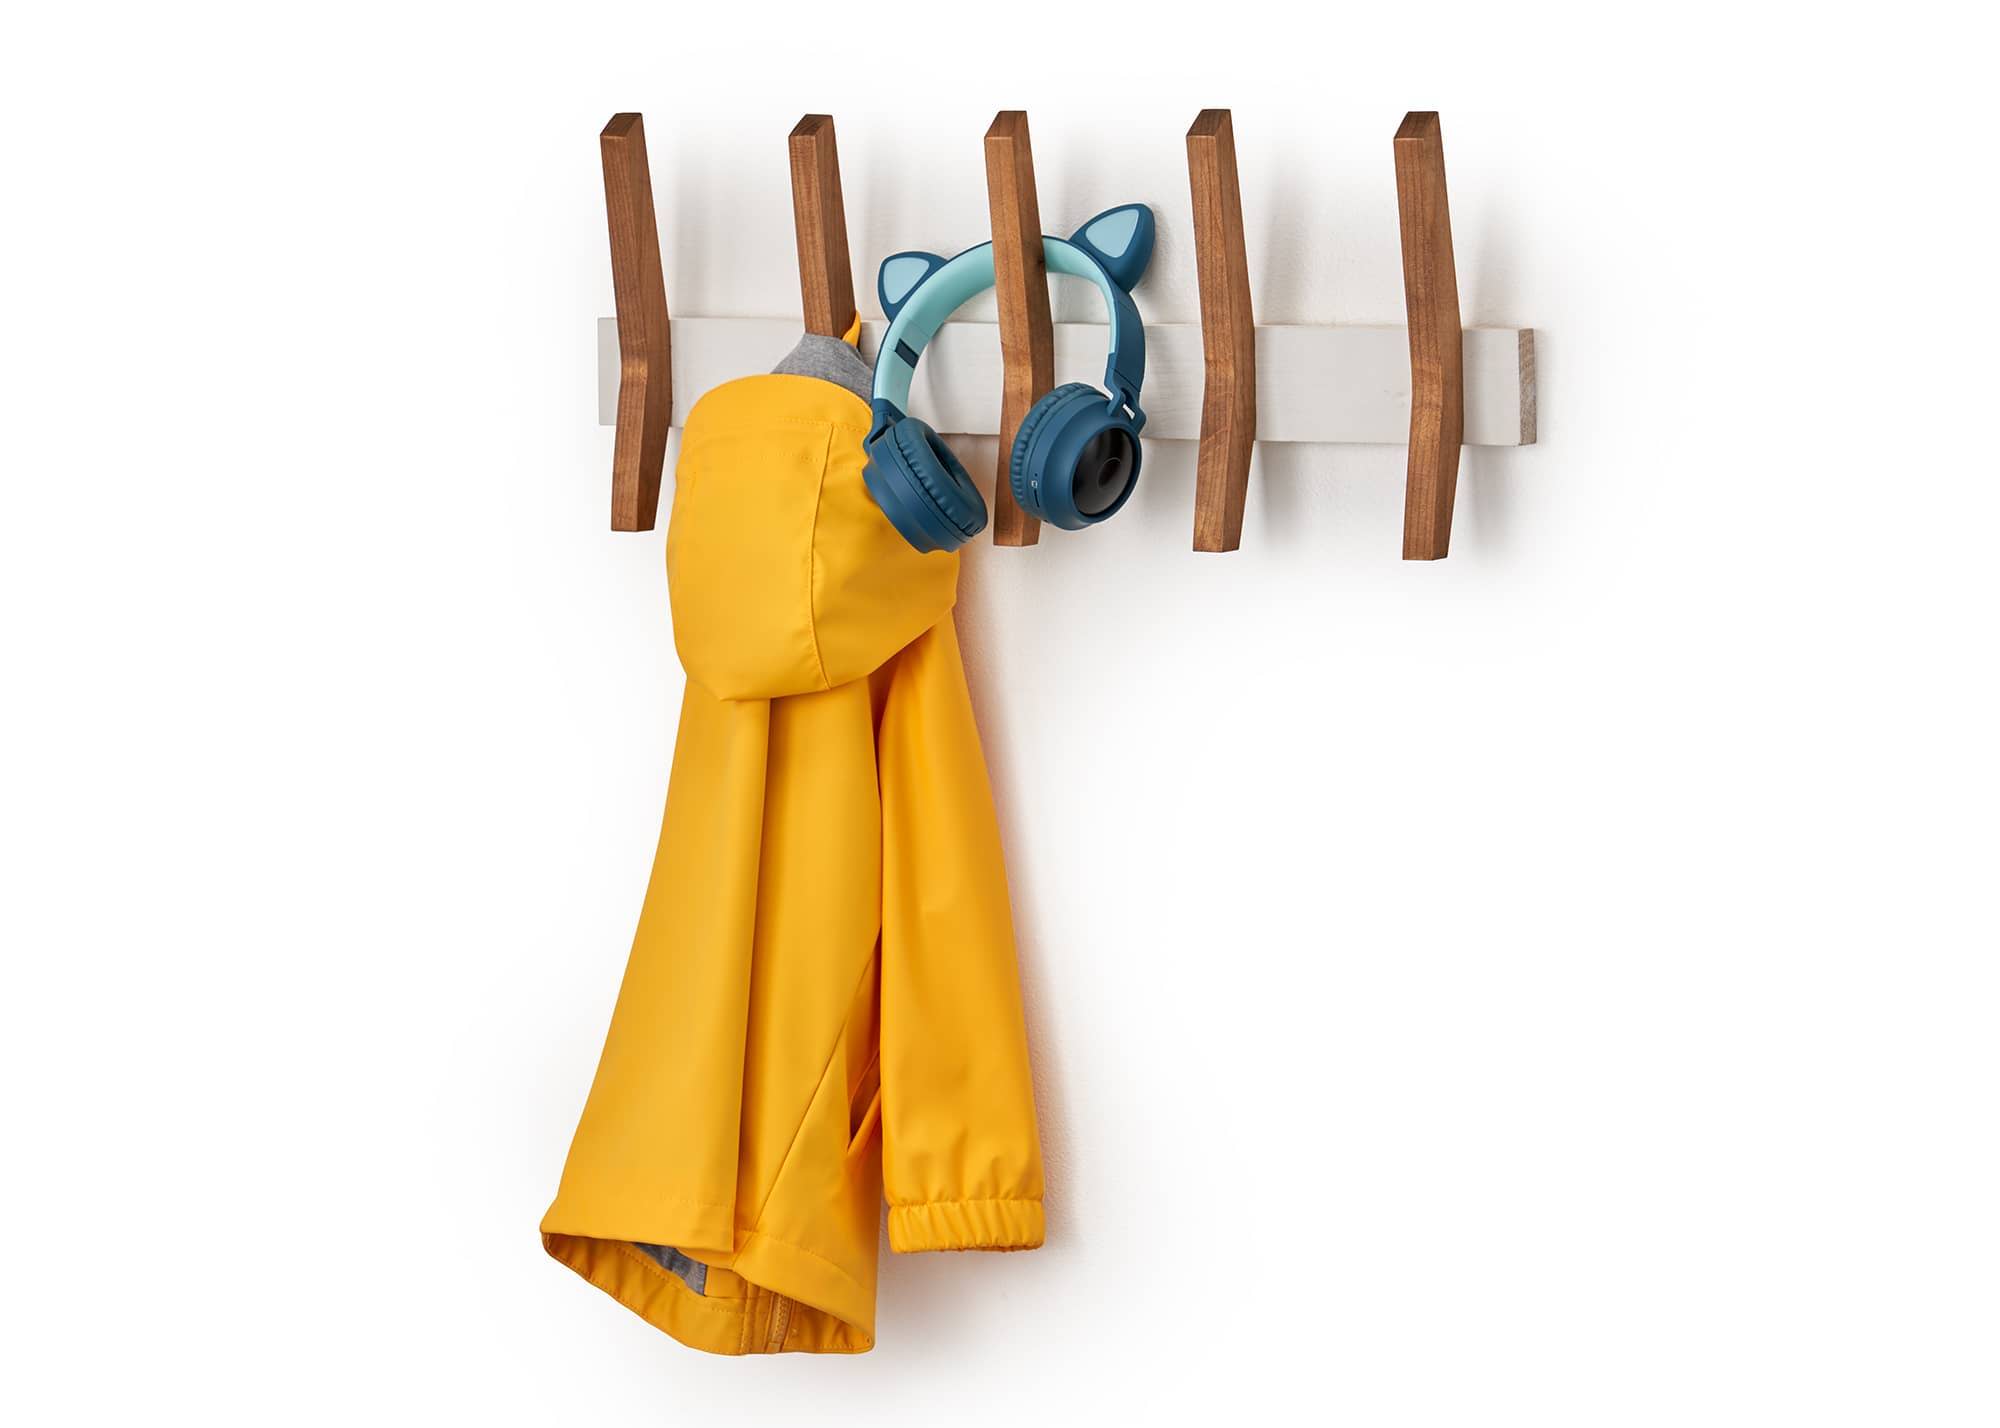 wood wall rack with 5 hooks, with a coat and headphones hanging